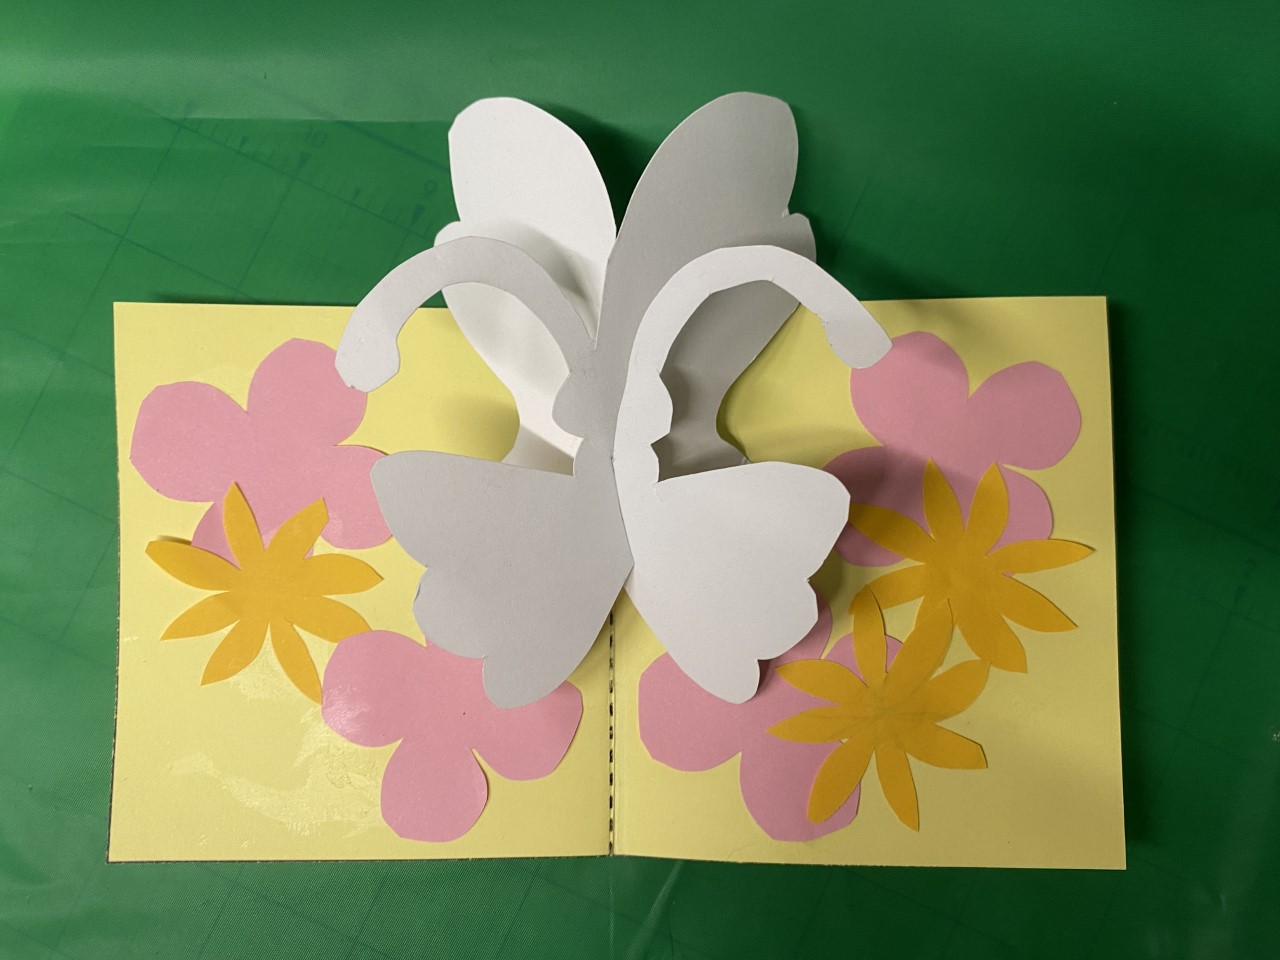 image of a pop up card of a butterfly